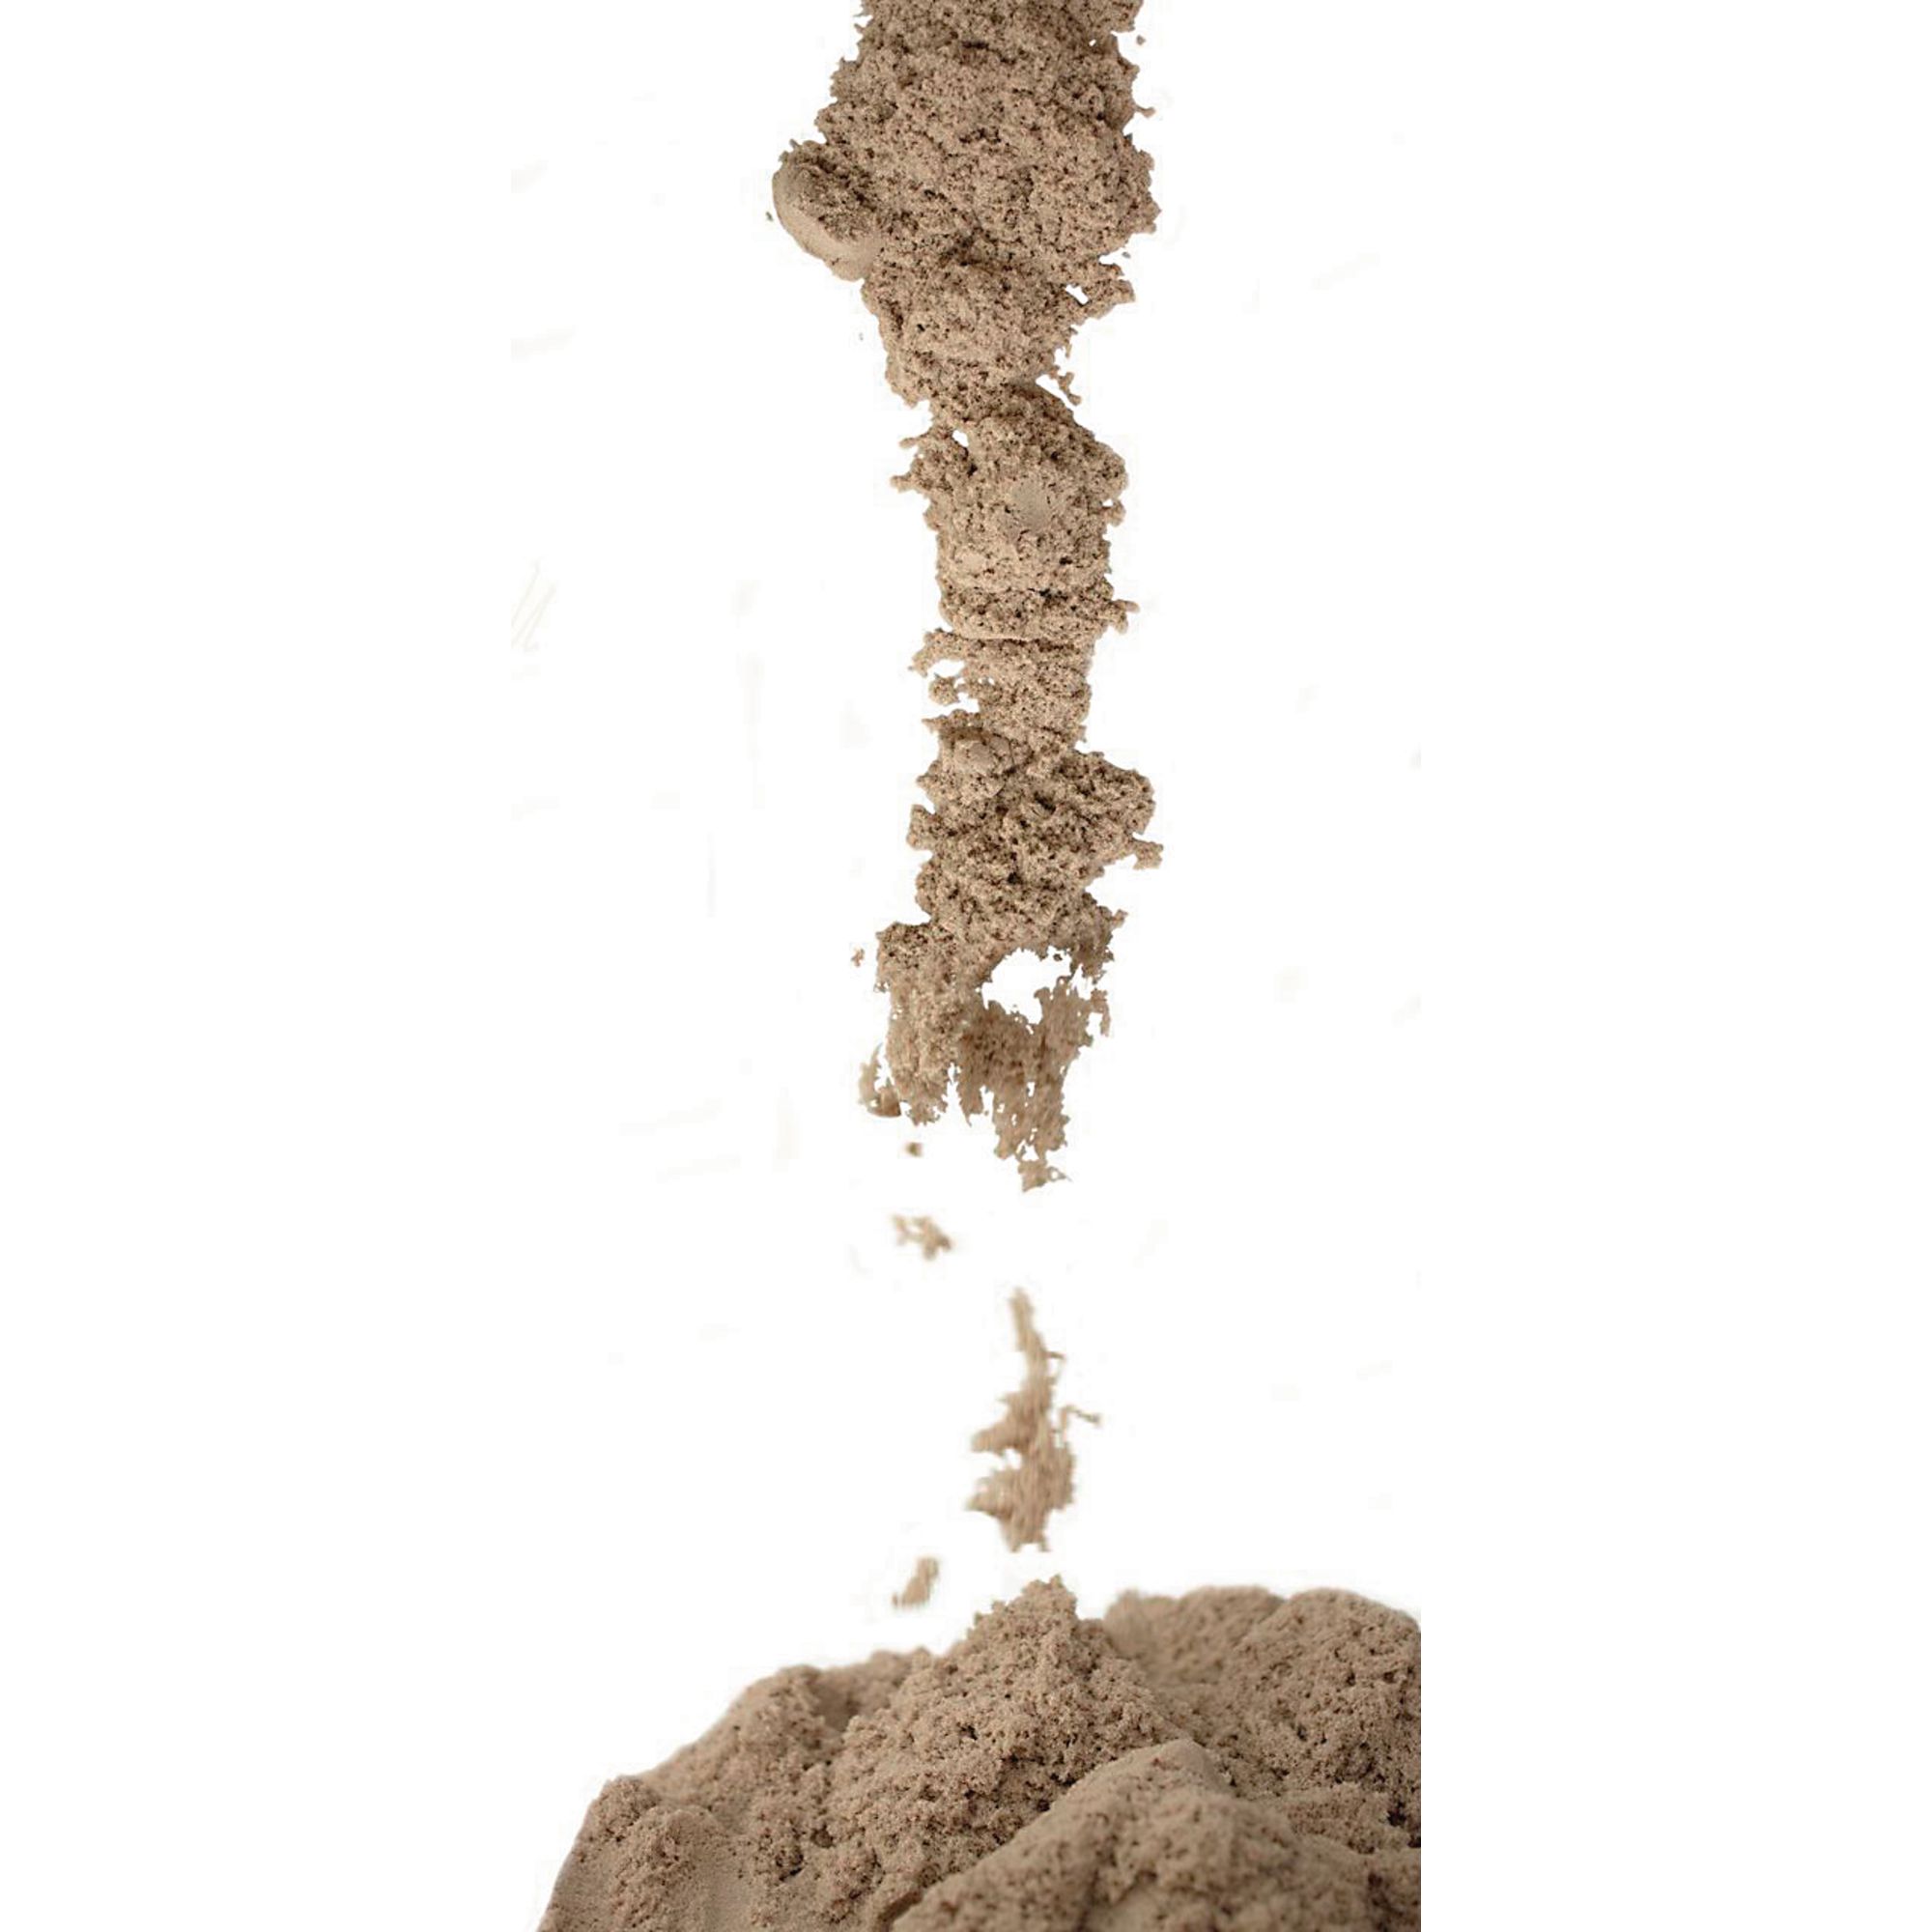 kinetic sand in motion